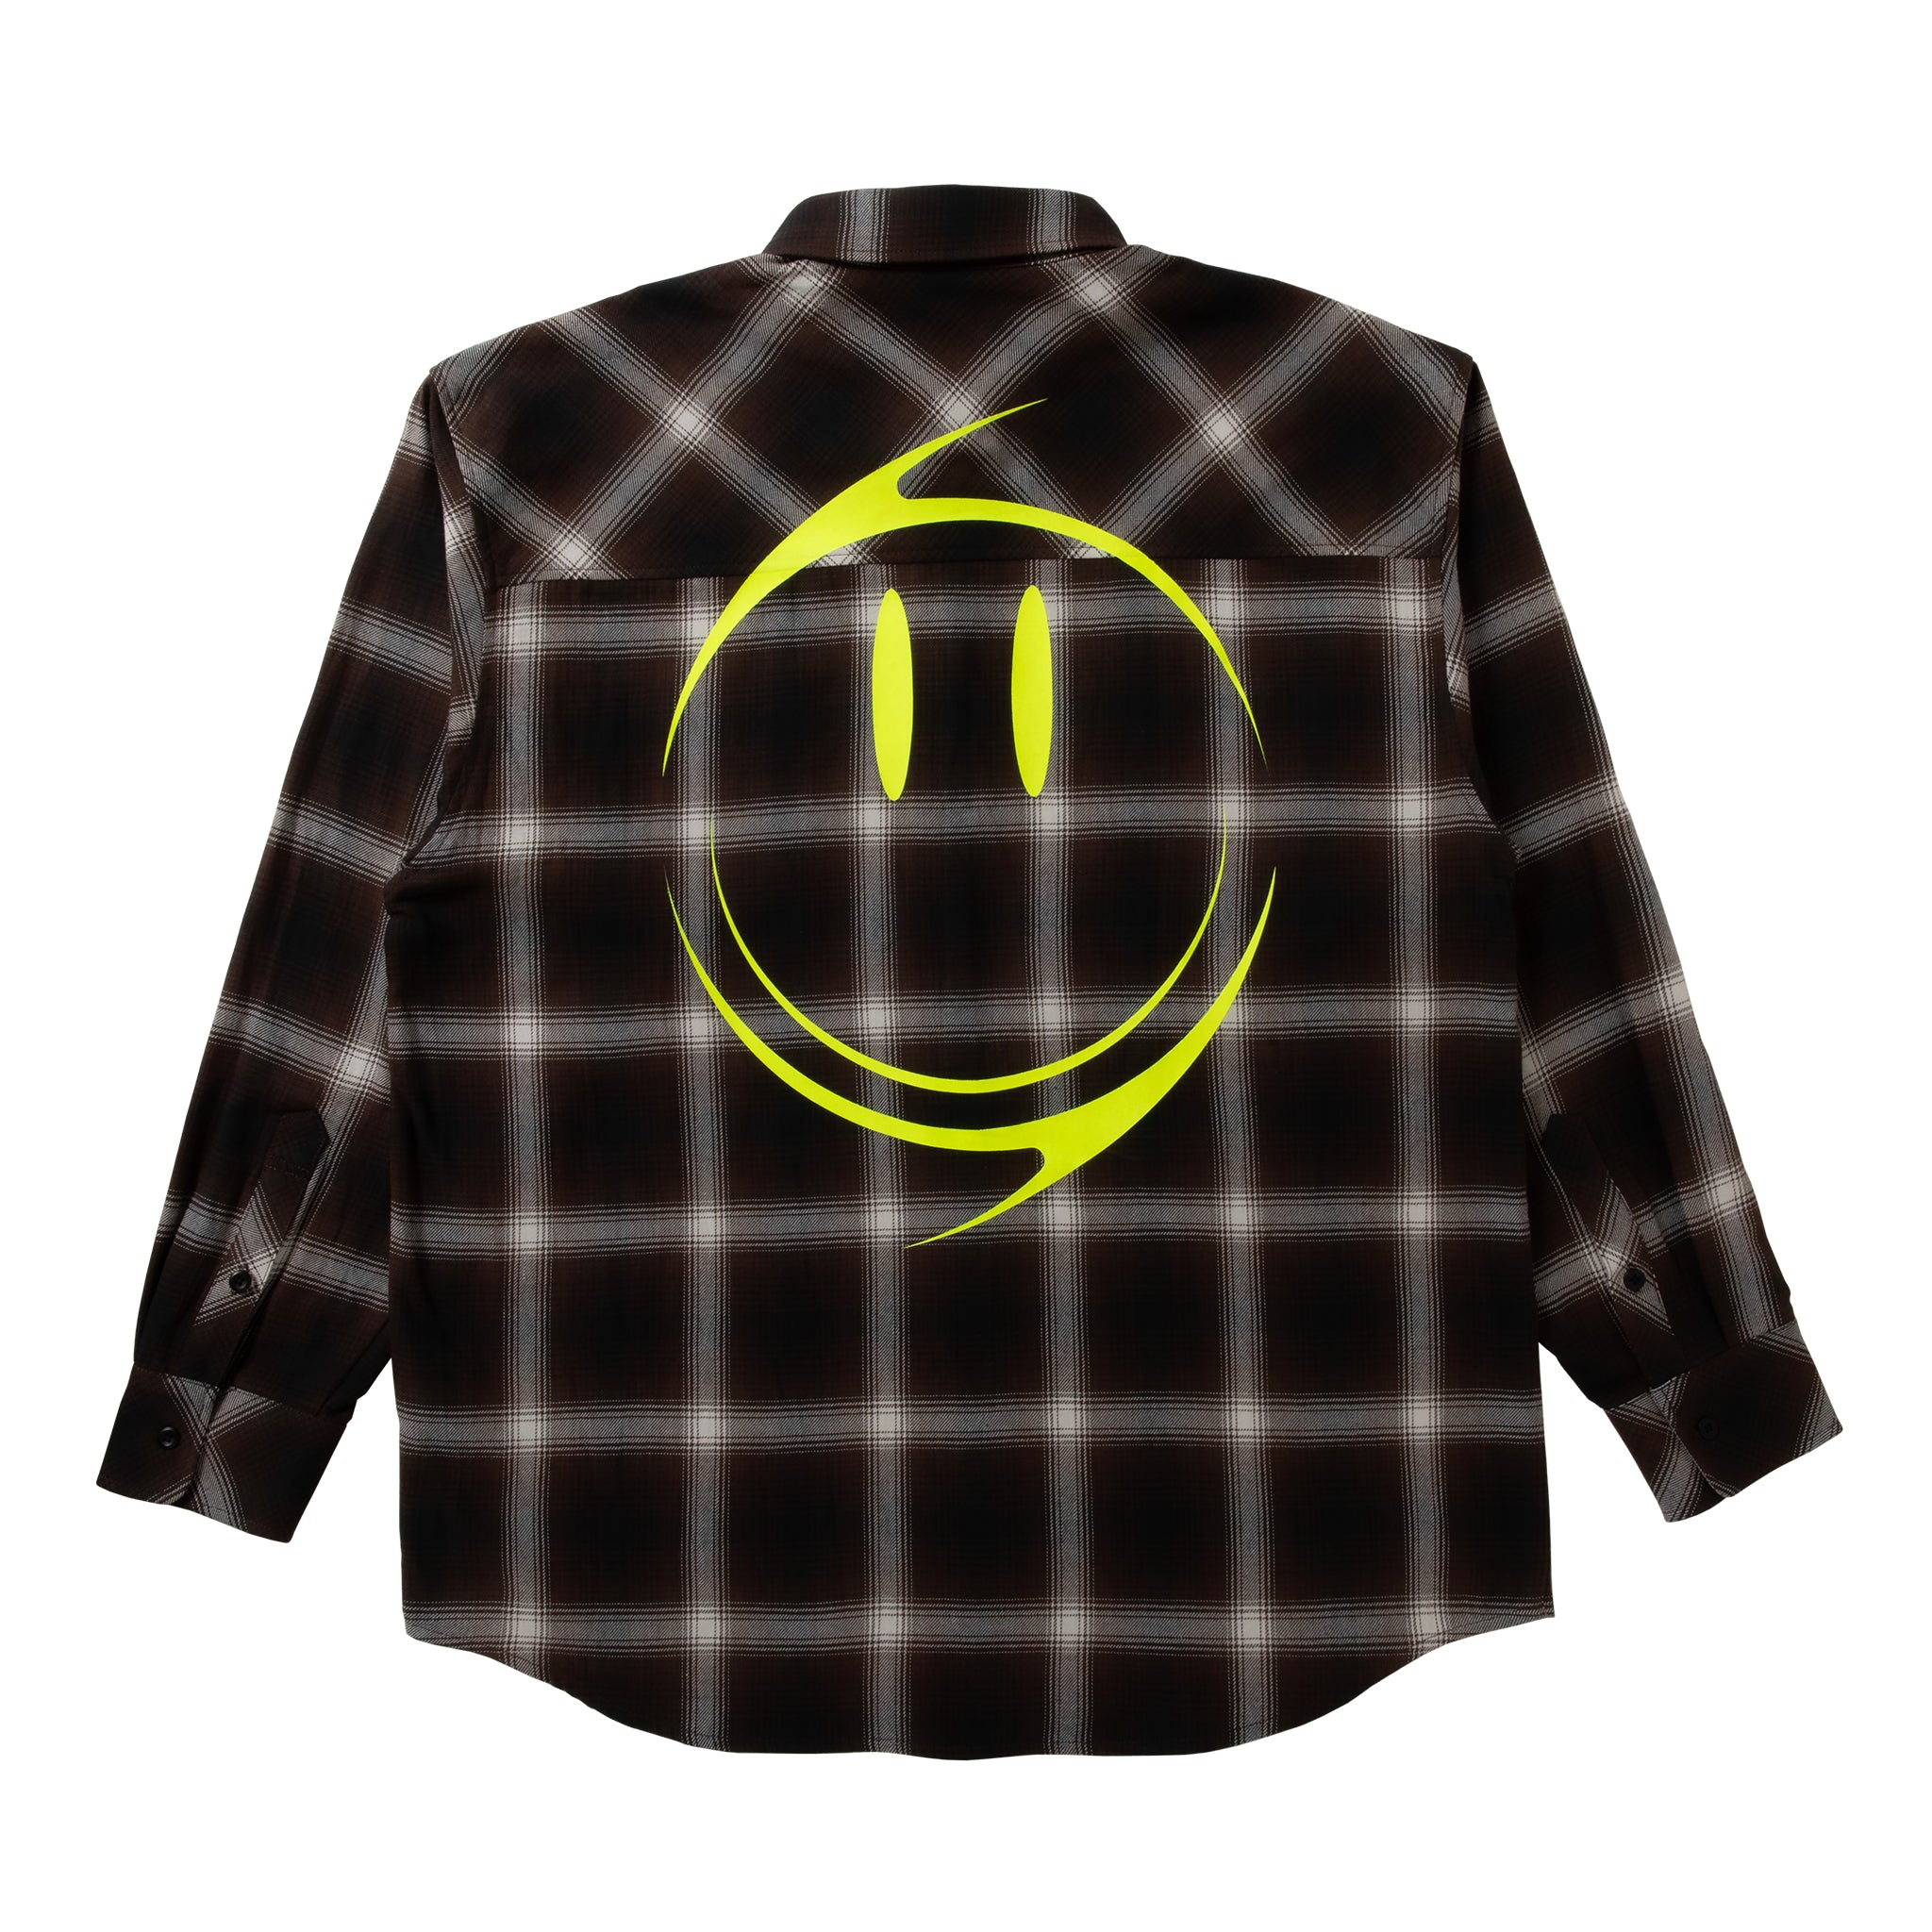 loosejoints≒RAFU - GUCCIMAZE - 'Joints' Fluo printed Flannel shirt (Brown)